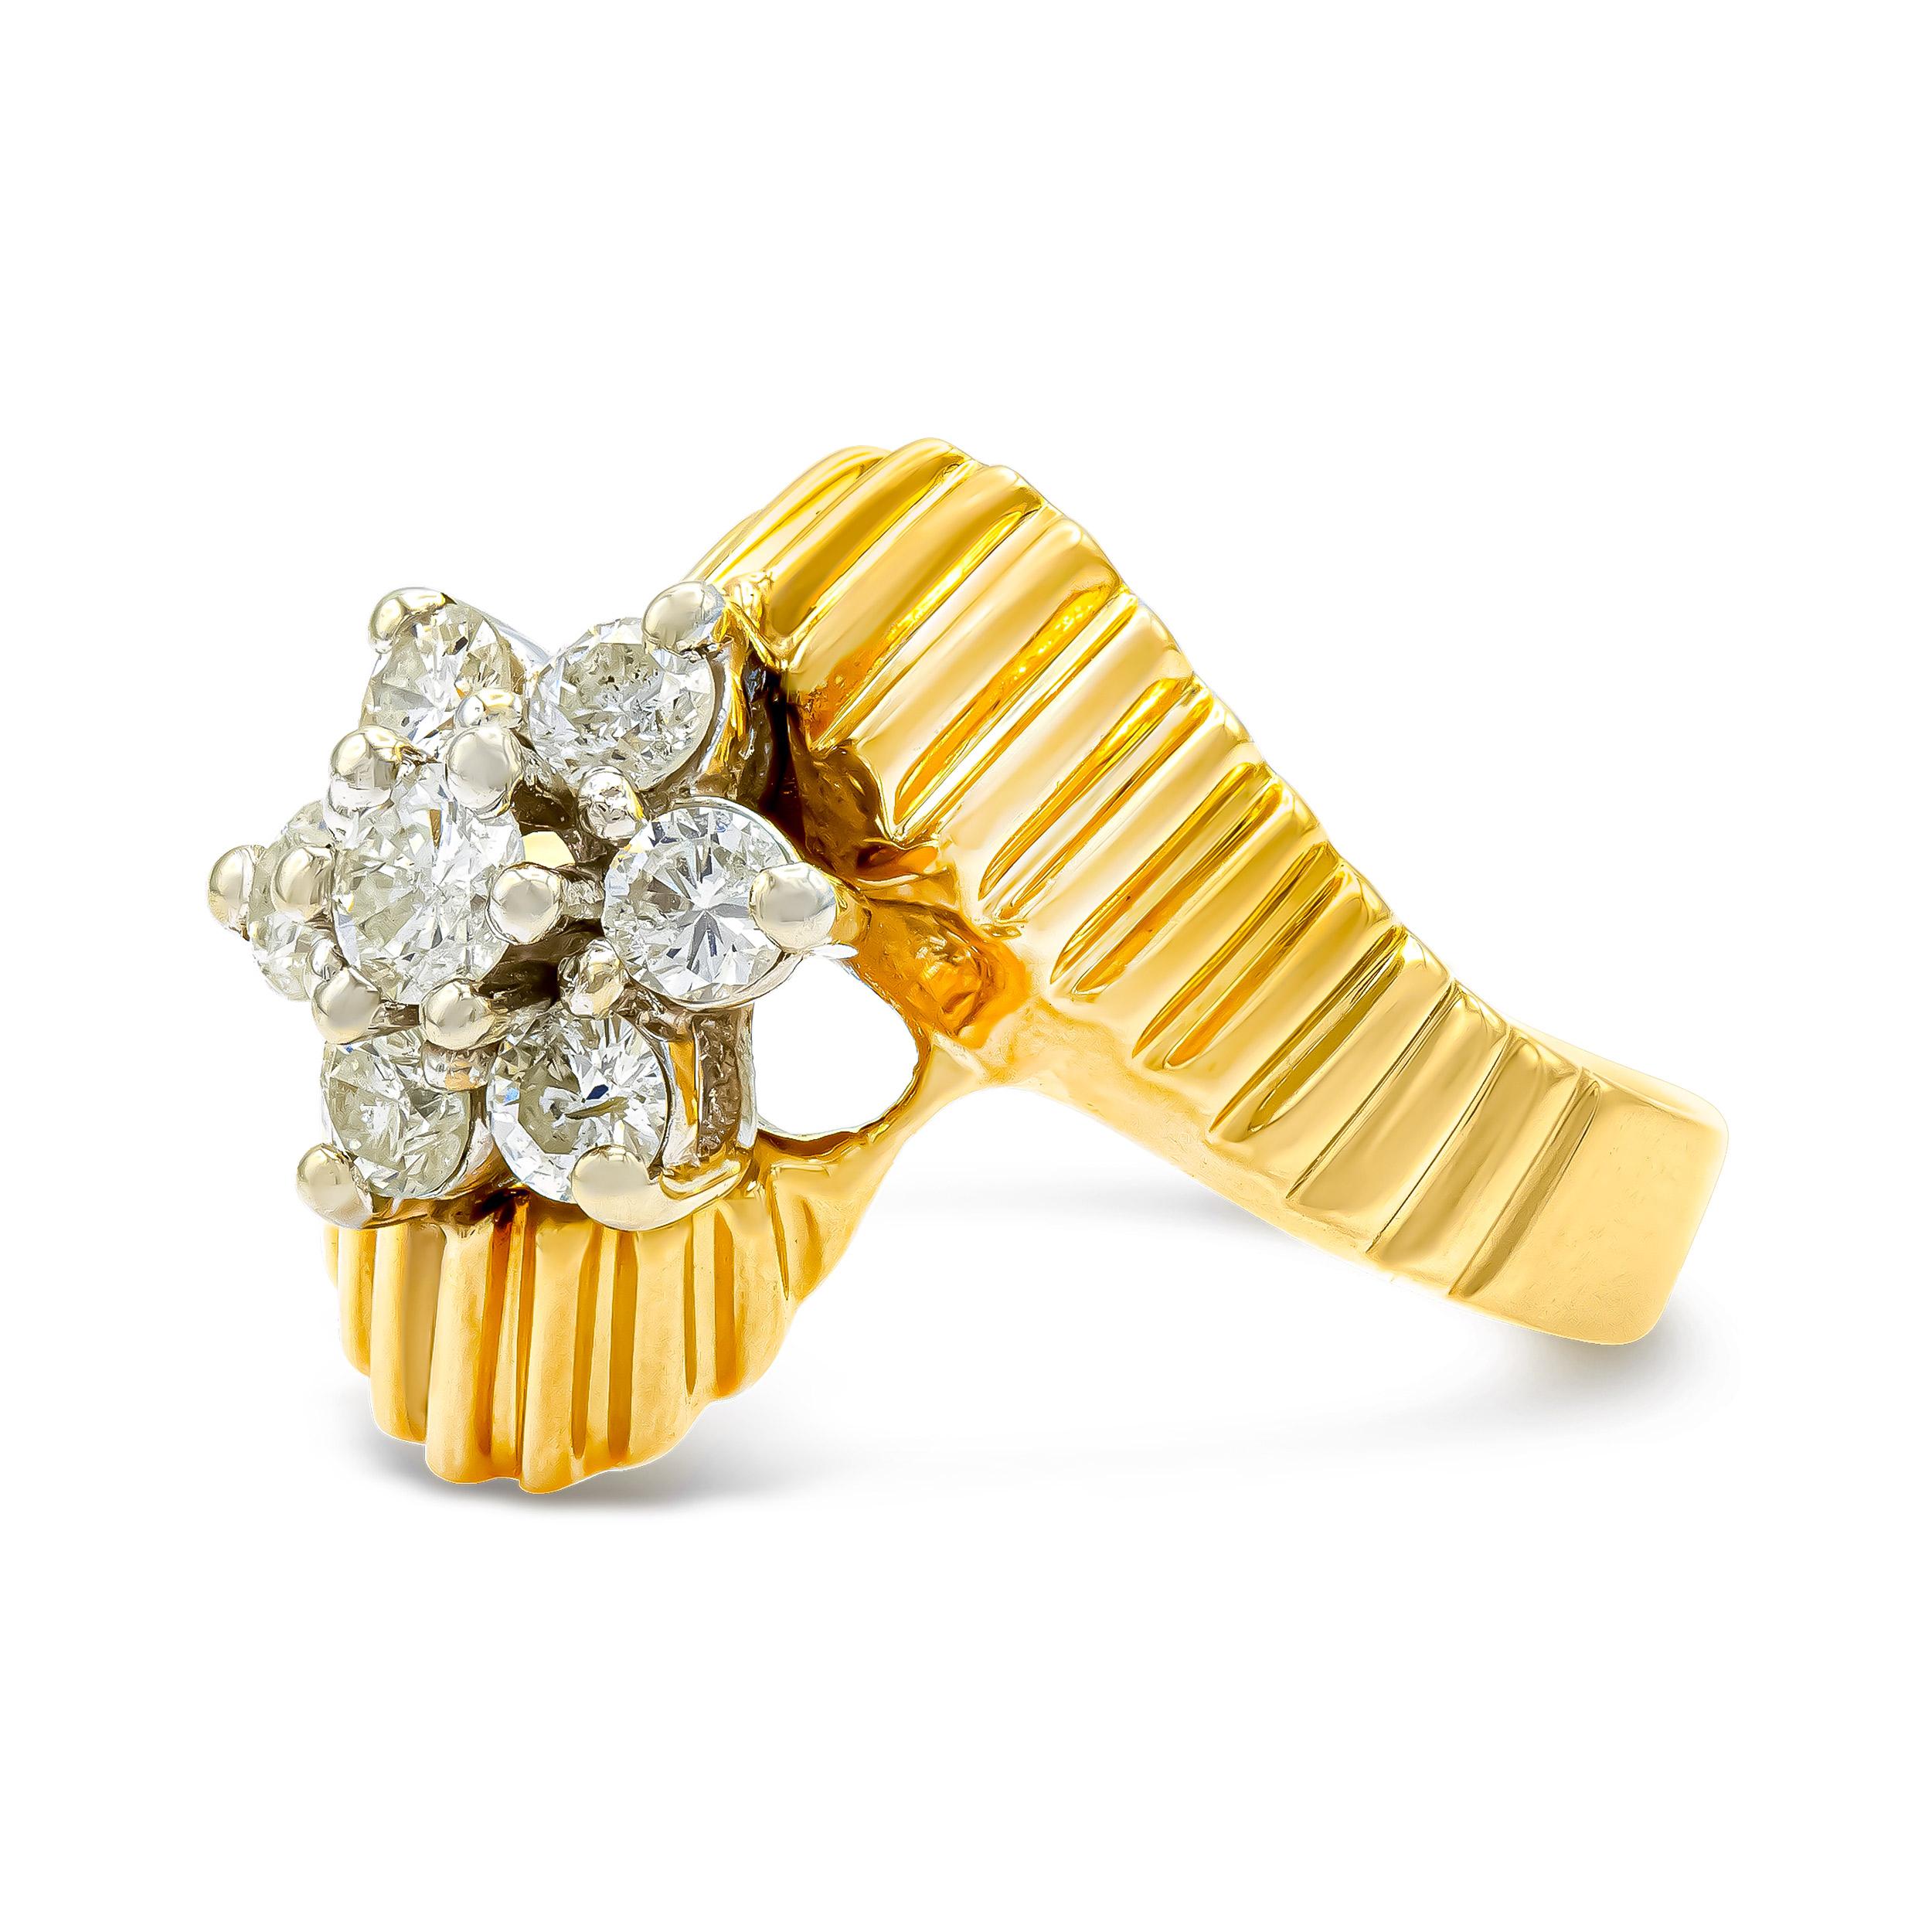 This pleated gold bypass band makes a major statement, paired with a cluster of transitional brilliant-cut diamonds. The floral motif is whimsical, charming, and ideal for daily wear.

Diamond Details:
Accent Stones: (7) Transitional Brilliant Cut